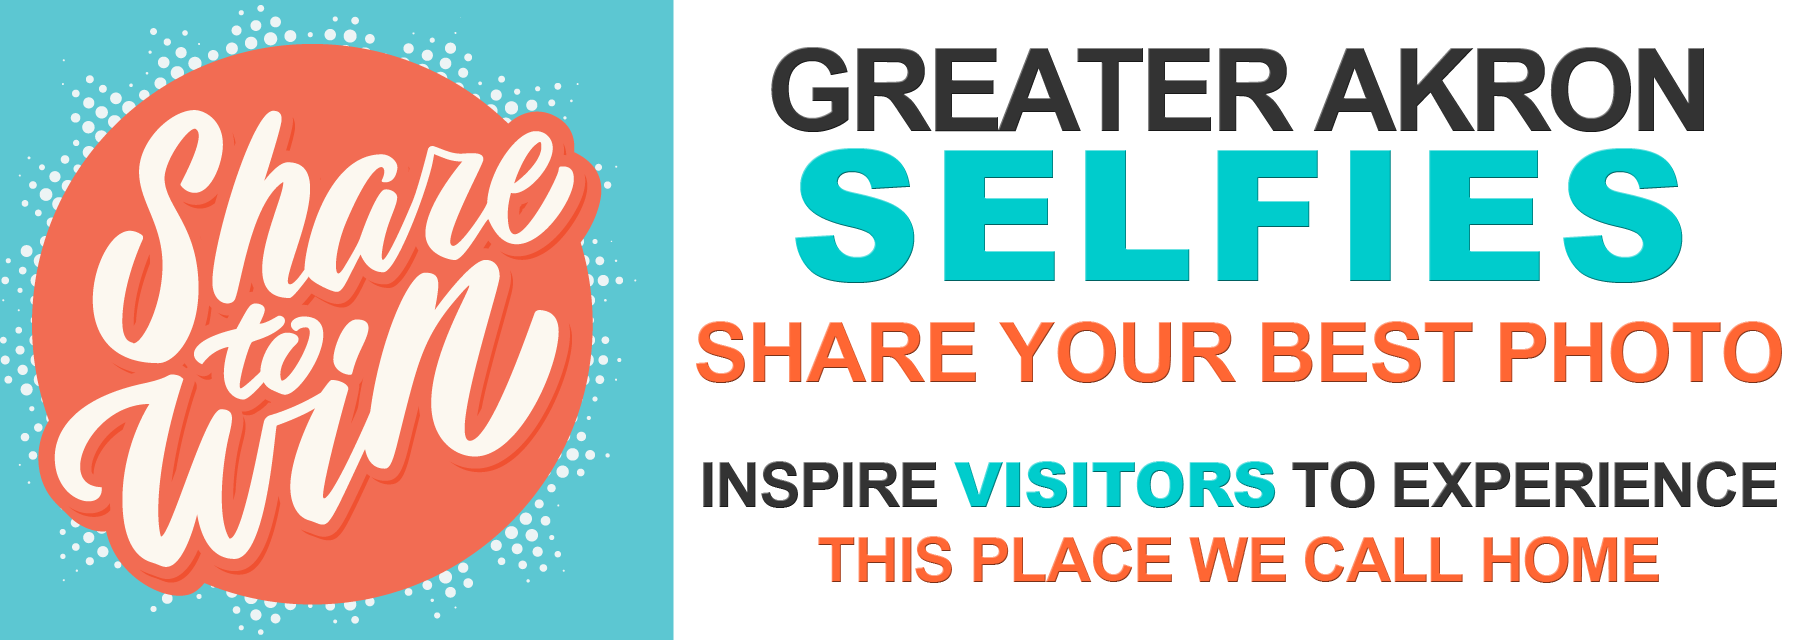 Greater Akron Selfies Share Your Best Photo Inspire Visitors To Experience This Place We Call Home